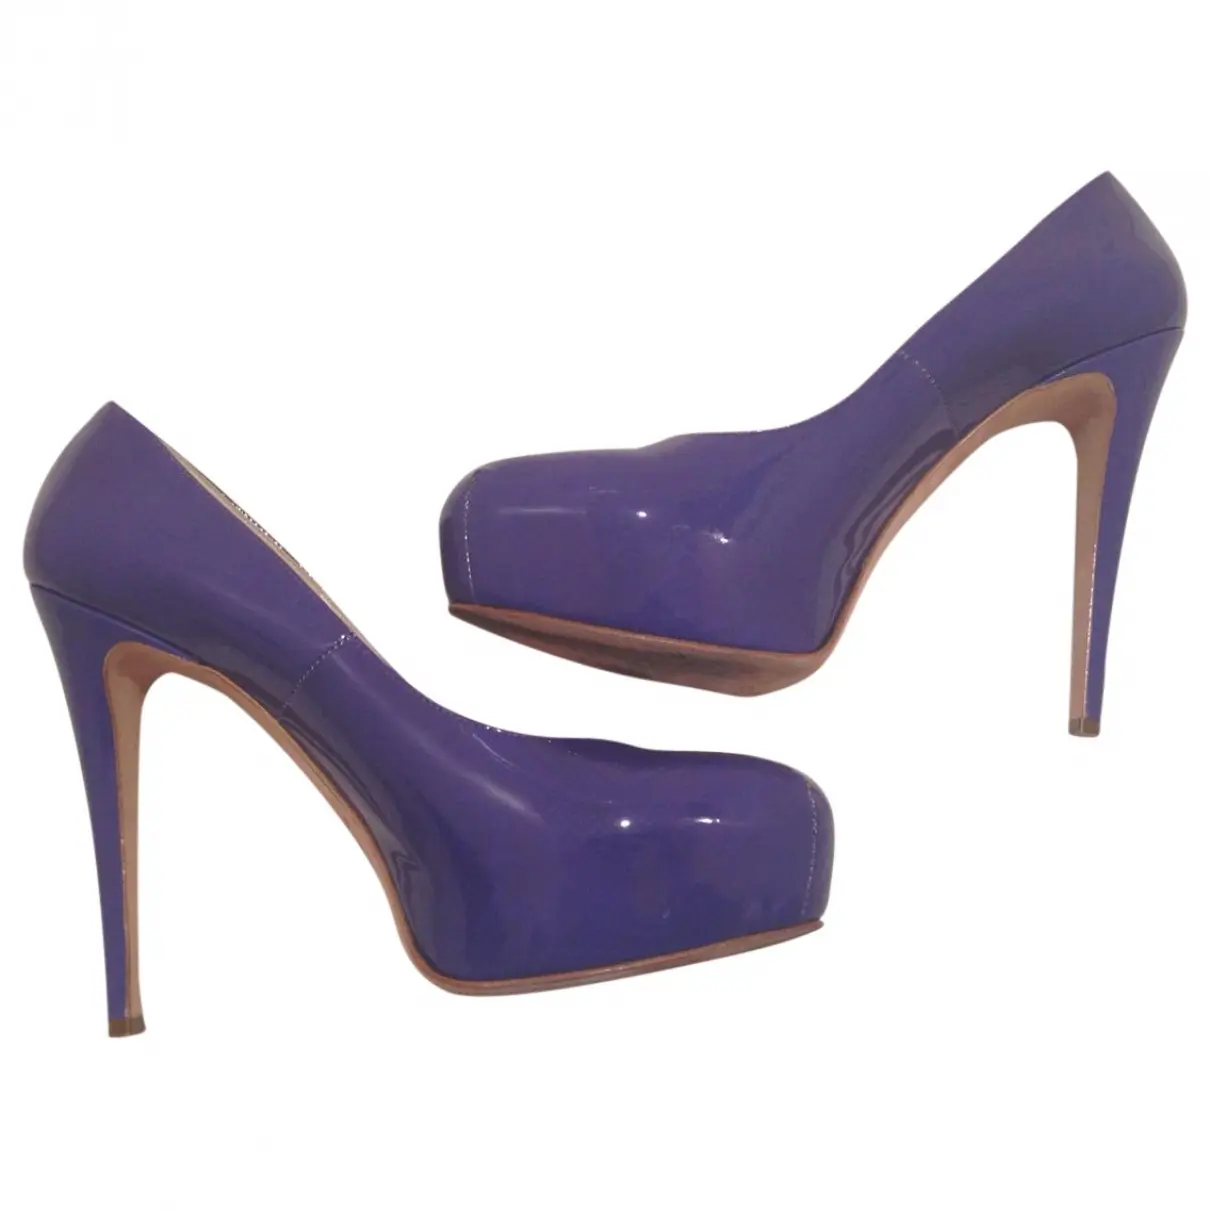 Purple Patent leather Heels Brian Atwood